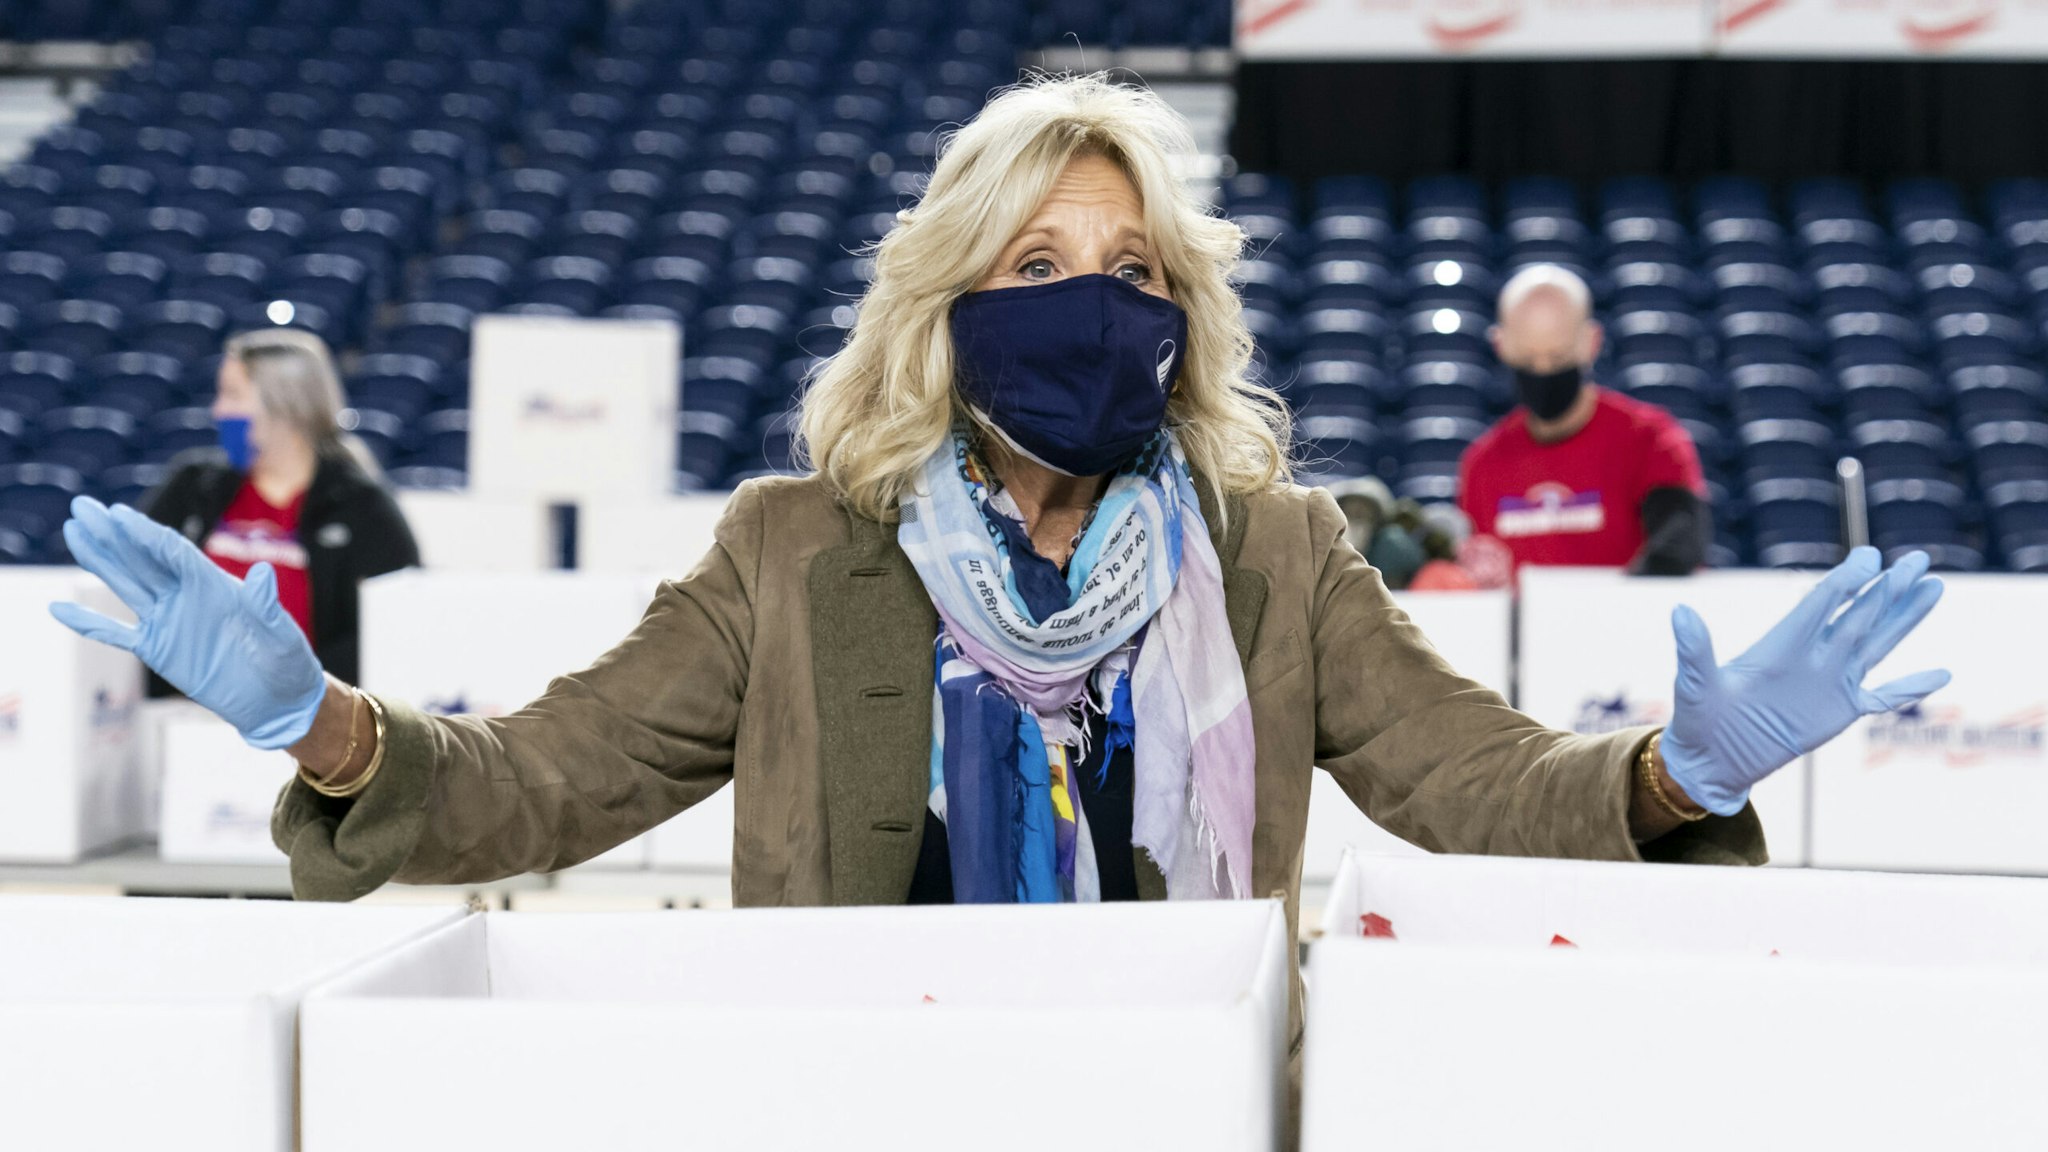 WASHINGTON, DC - DECEMBER 10: Dr. Jill Biden speaks to the media as she assembles care packages for military families for the holiday season on December 10, 2020 in Washington, DC. Hunter Biden, the son of President-elect Joe Biden, is under investigation by the Justice Department for his business dealings in China.